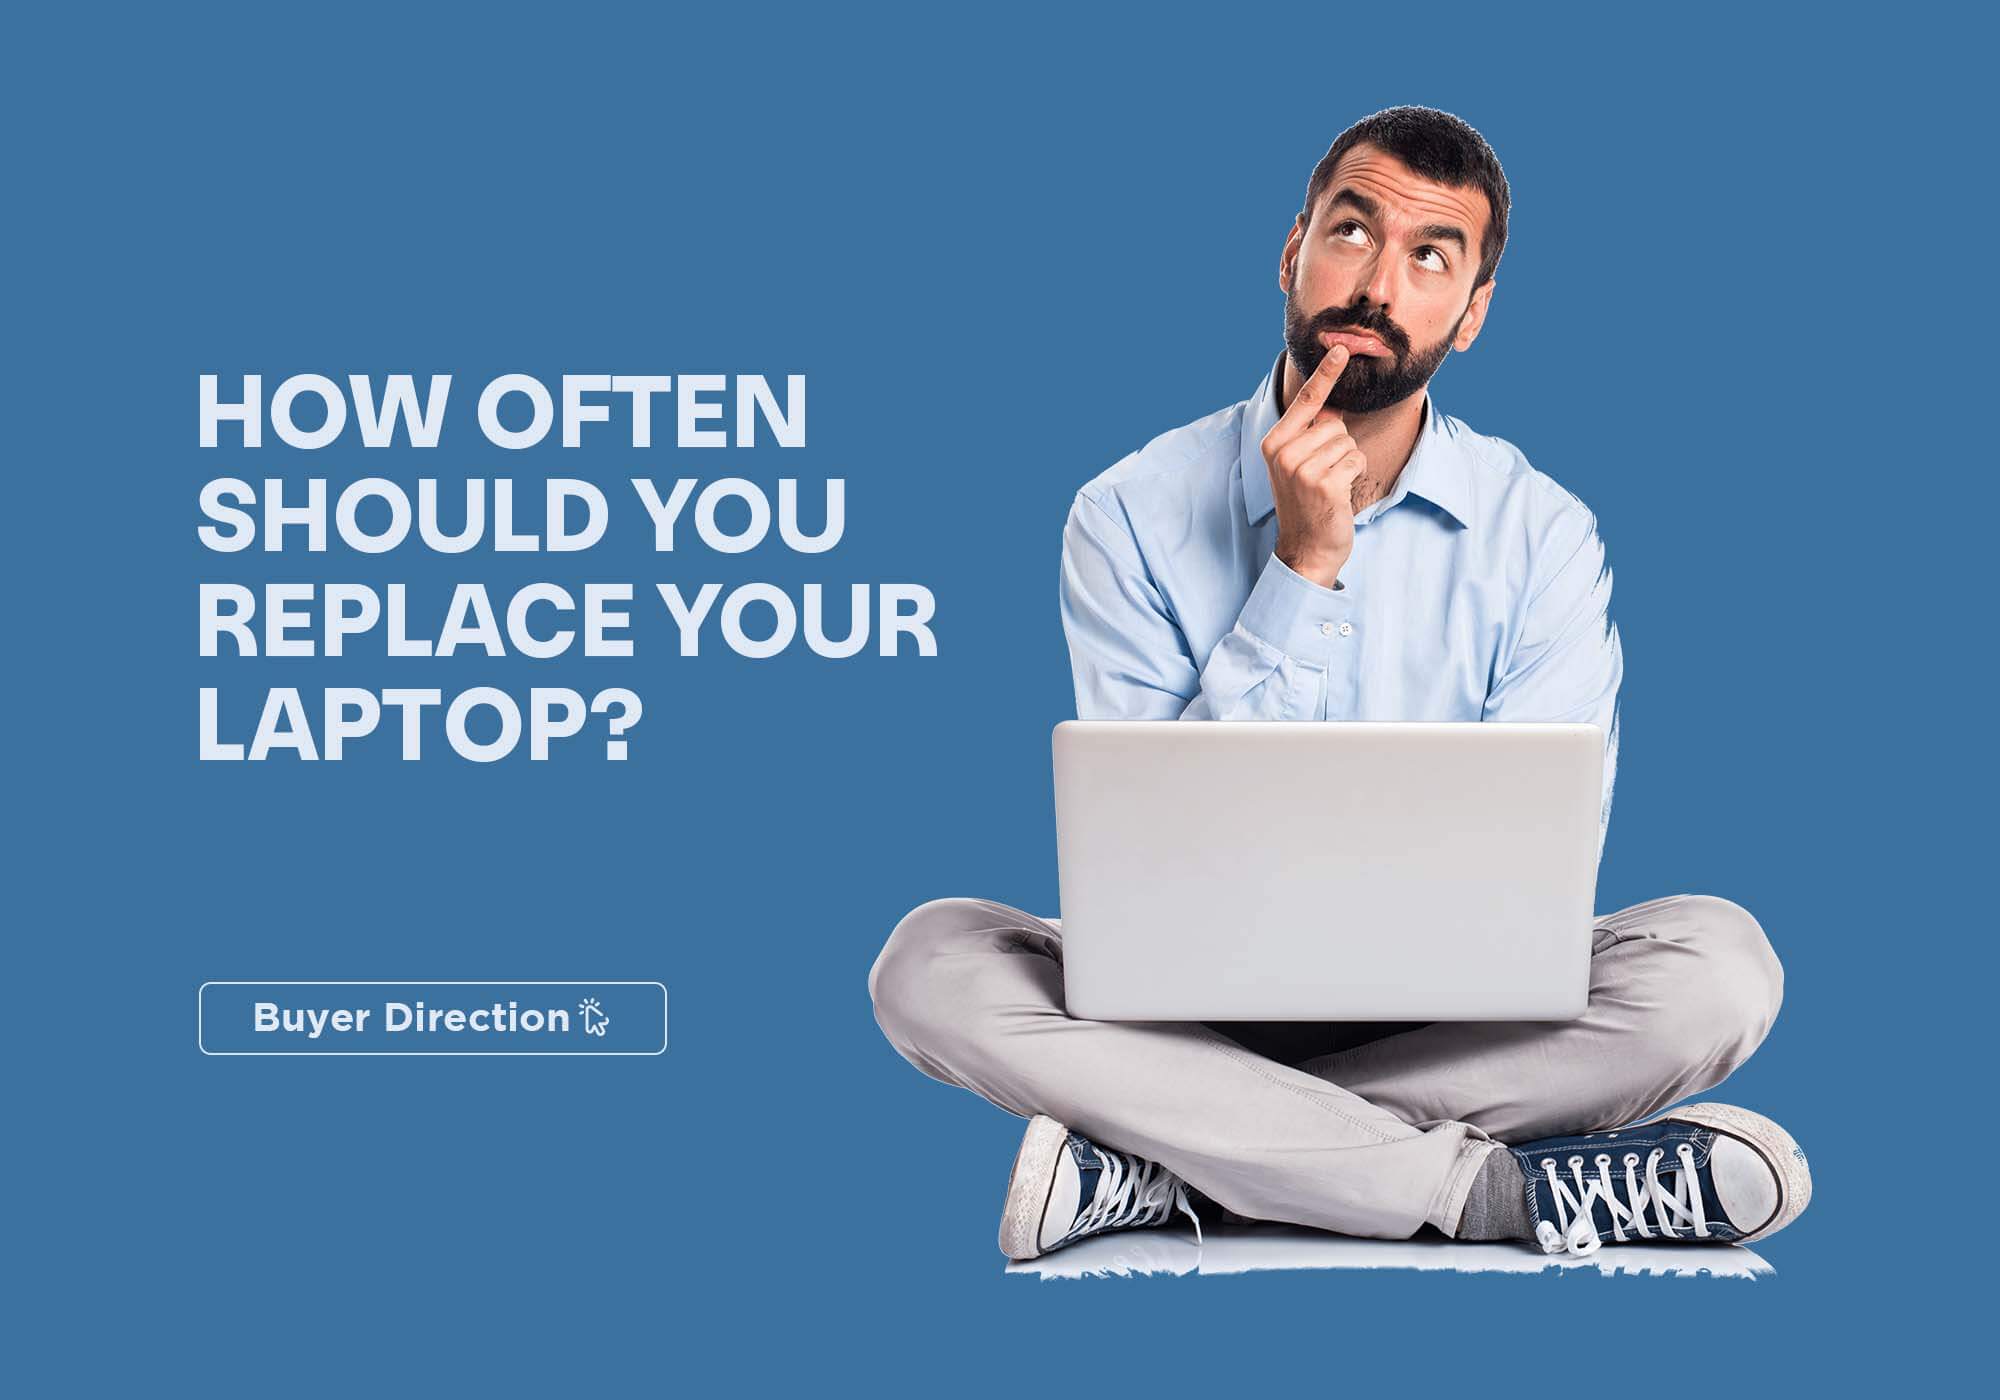 How Often Should You Replace Your Laptop?